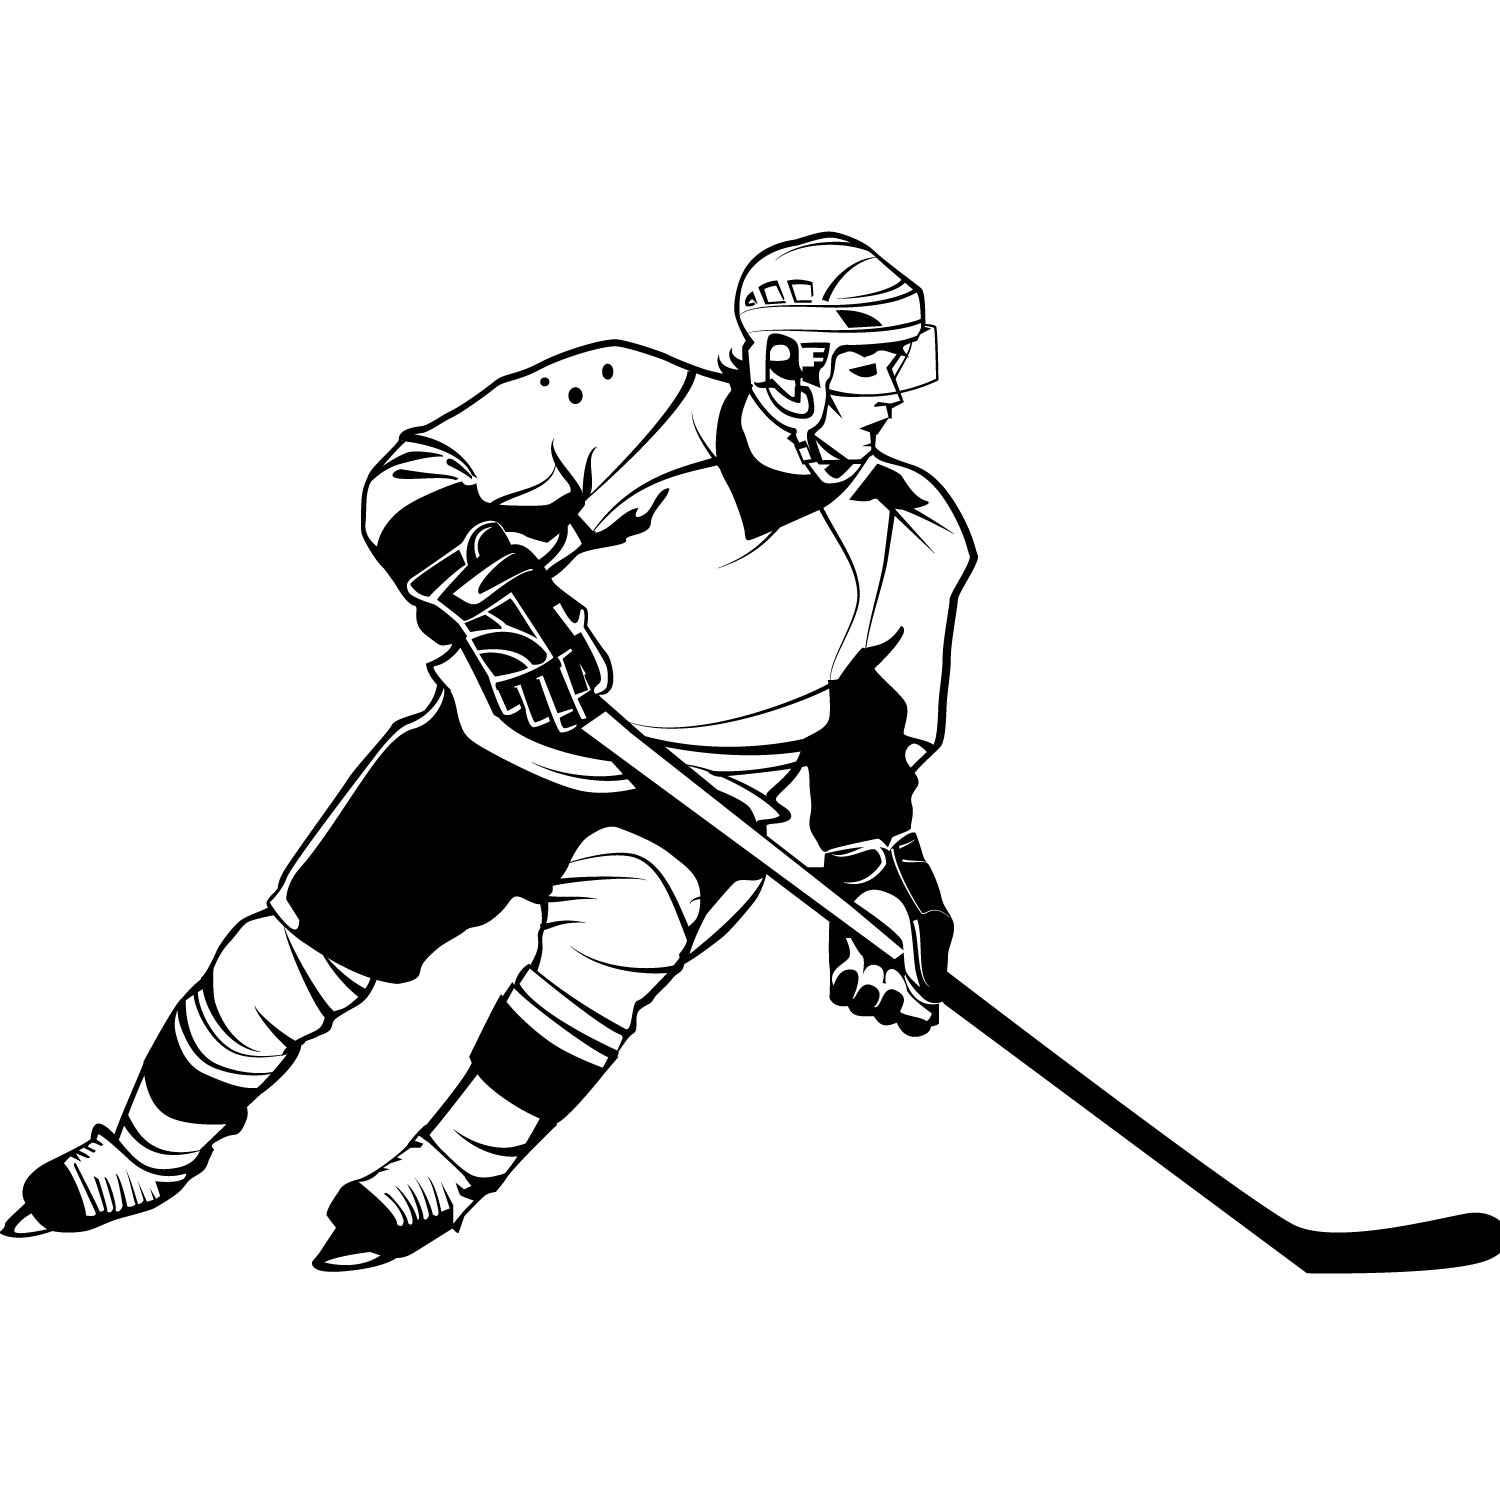 Hockey Images Images Hd Image Clipart